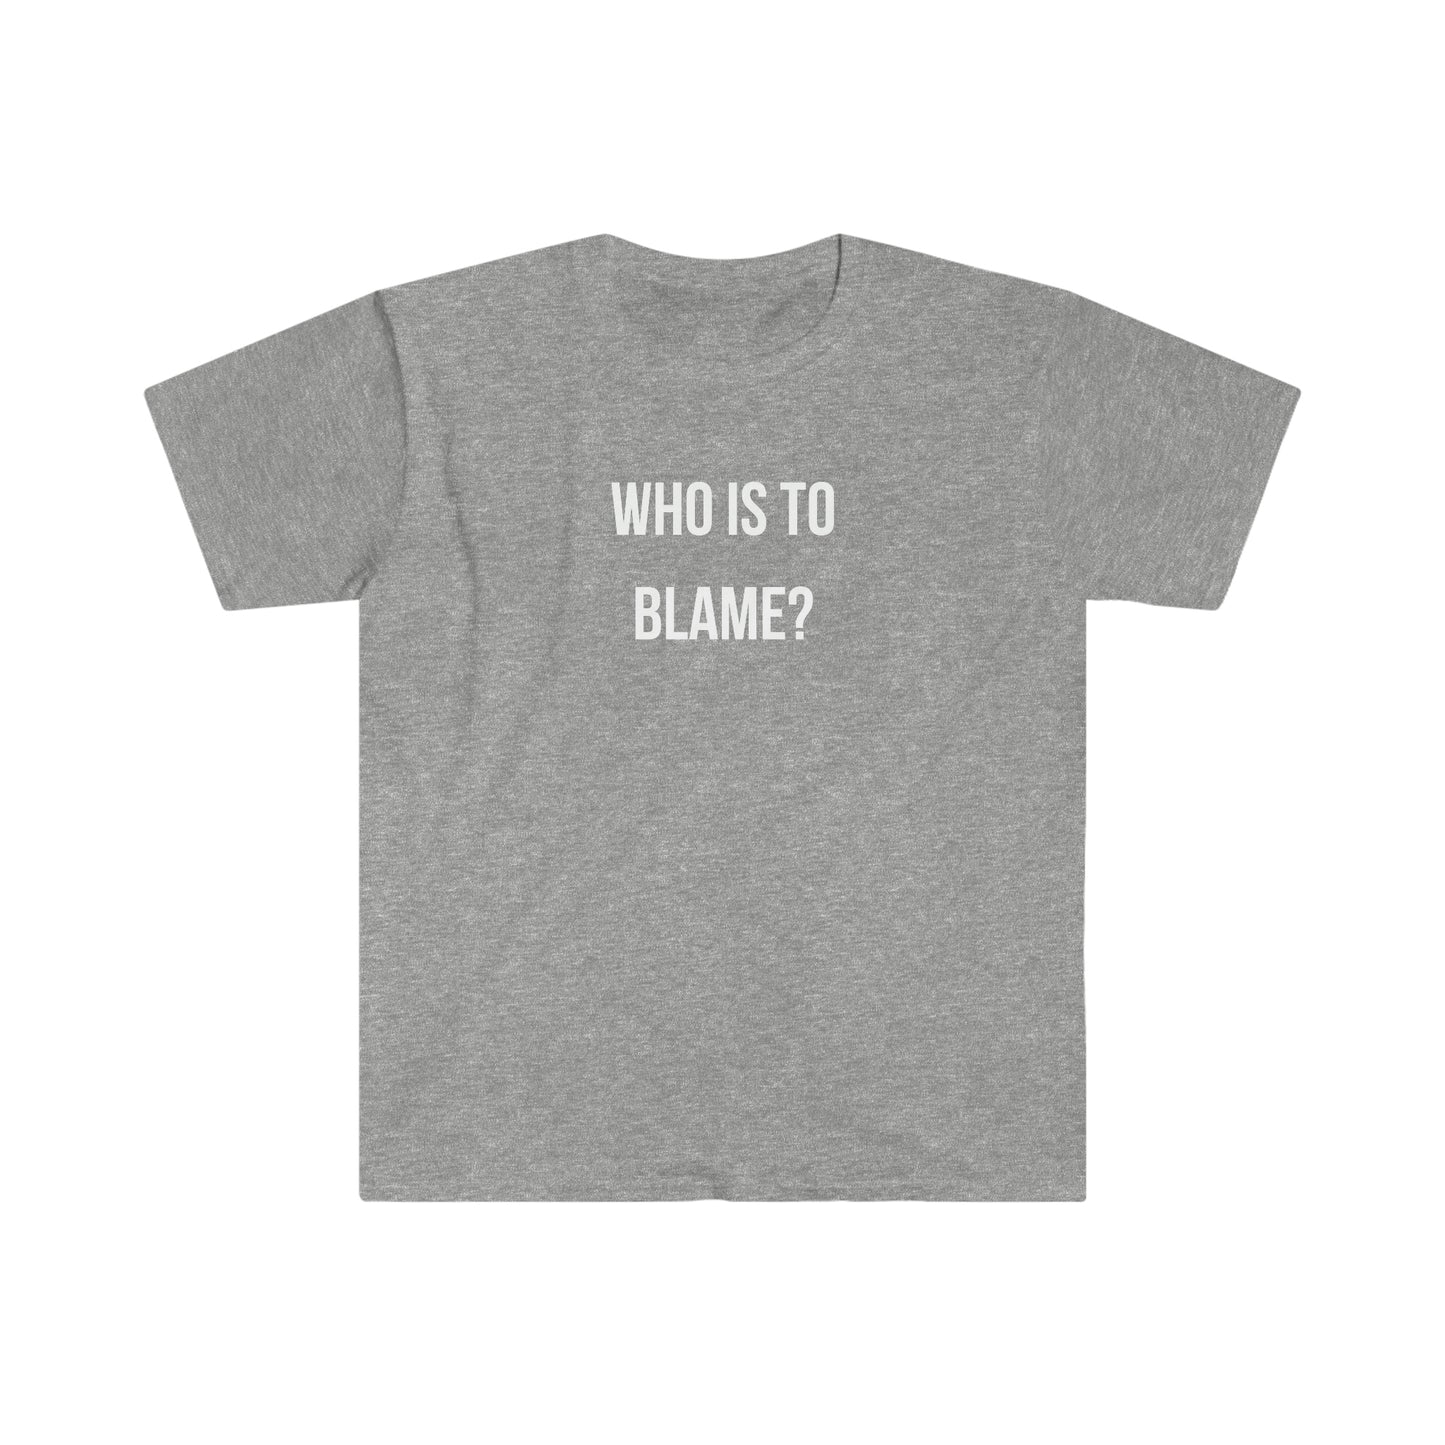 WHO IS TO BLAME? T-Shirt